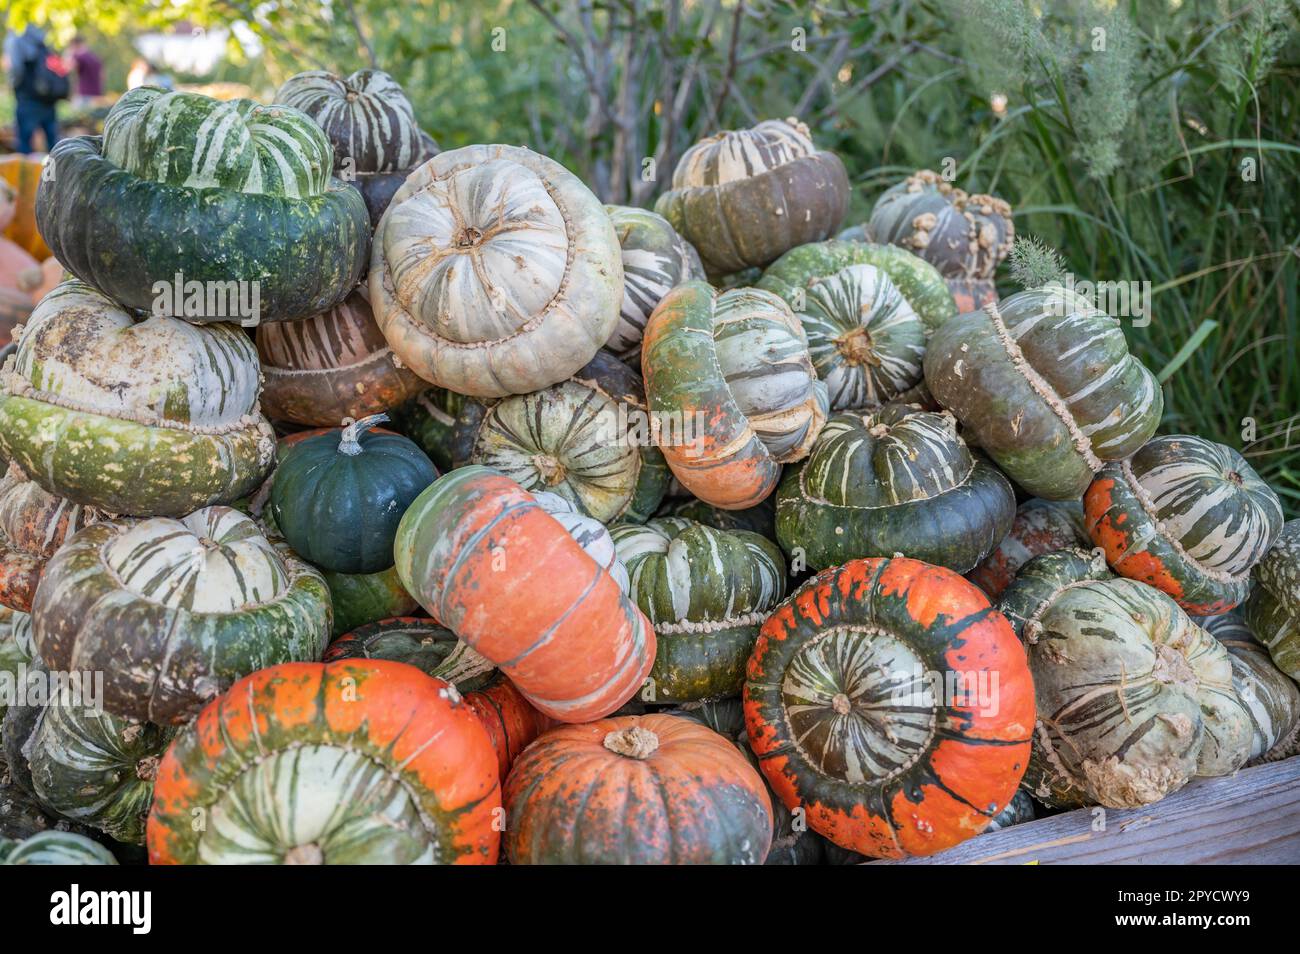 Pumpkins turban gourd, ornamental gourds stacked on each other in a wooden basket at a farm during harvest season, October, thanksgiving Stock Photo